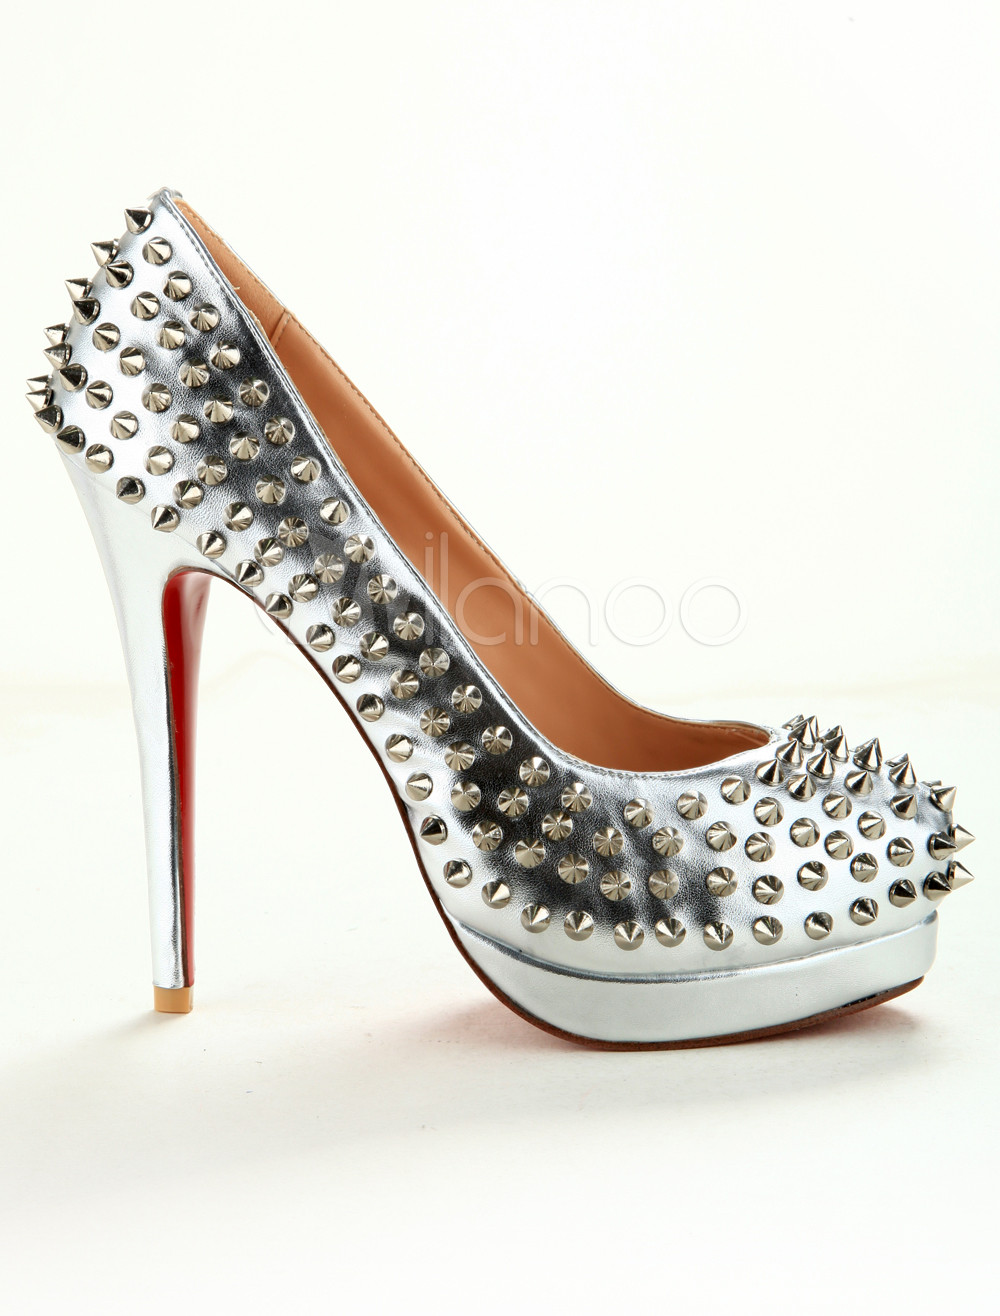 silver studded shoes